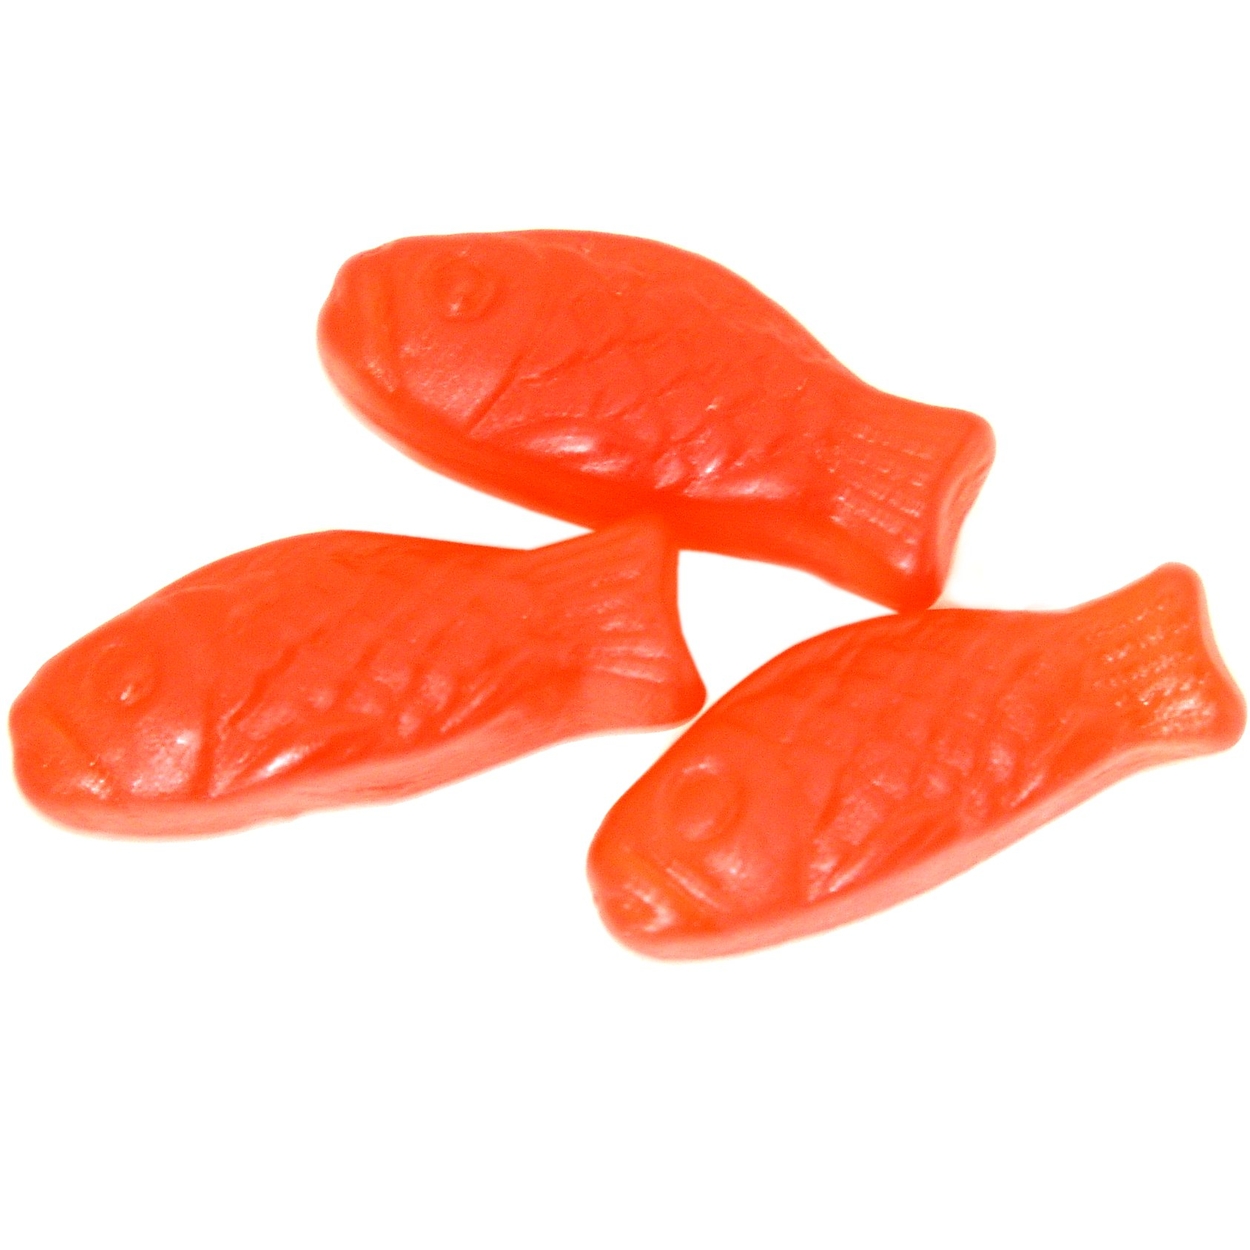 Red JuJu Fish - Red Fish Candy • Oh! Nuts®